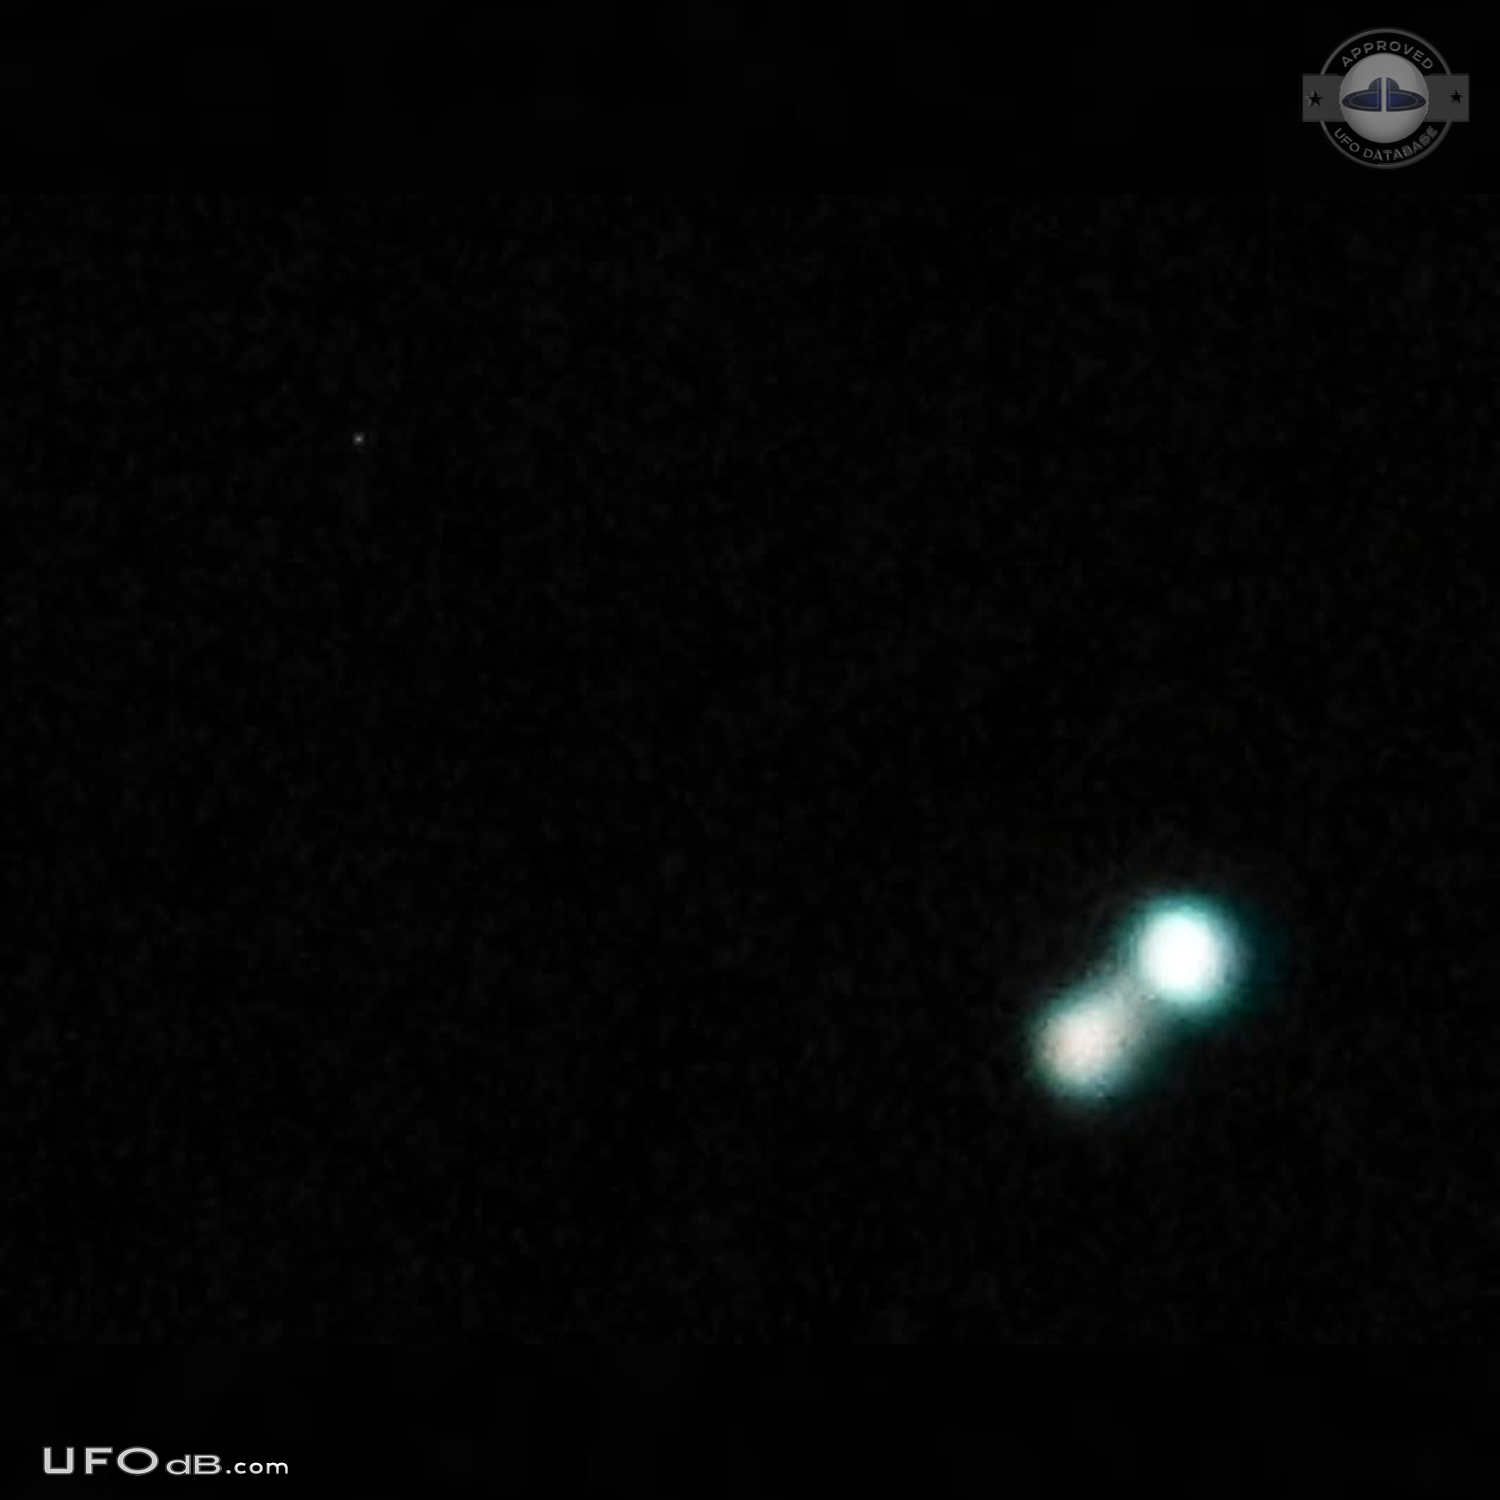 Very bright star UFO over Port Moresby, Papua New Guinea January 2015 UFO Picture #594-4